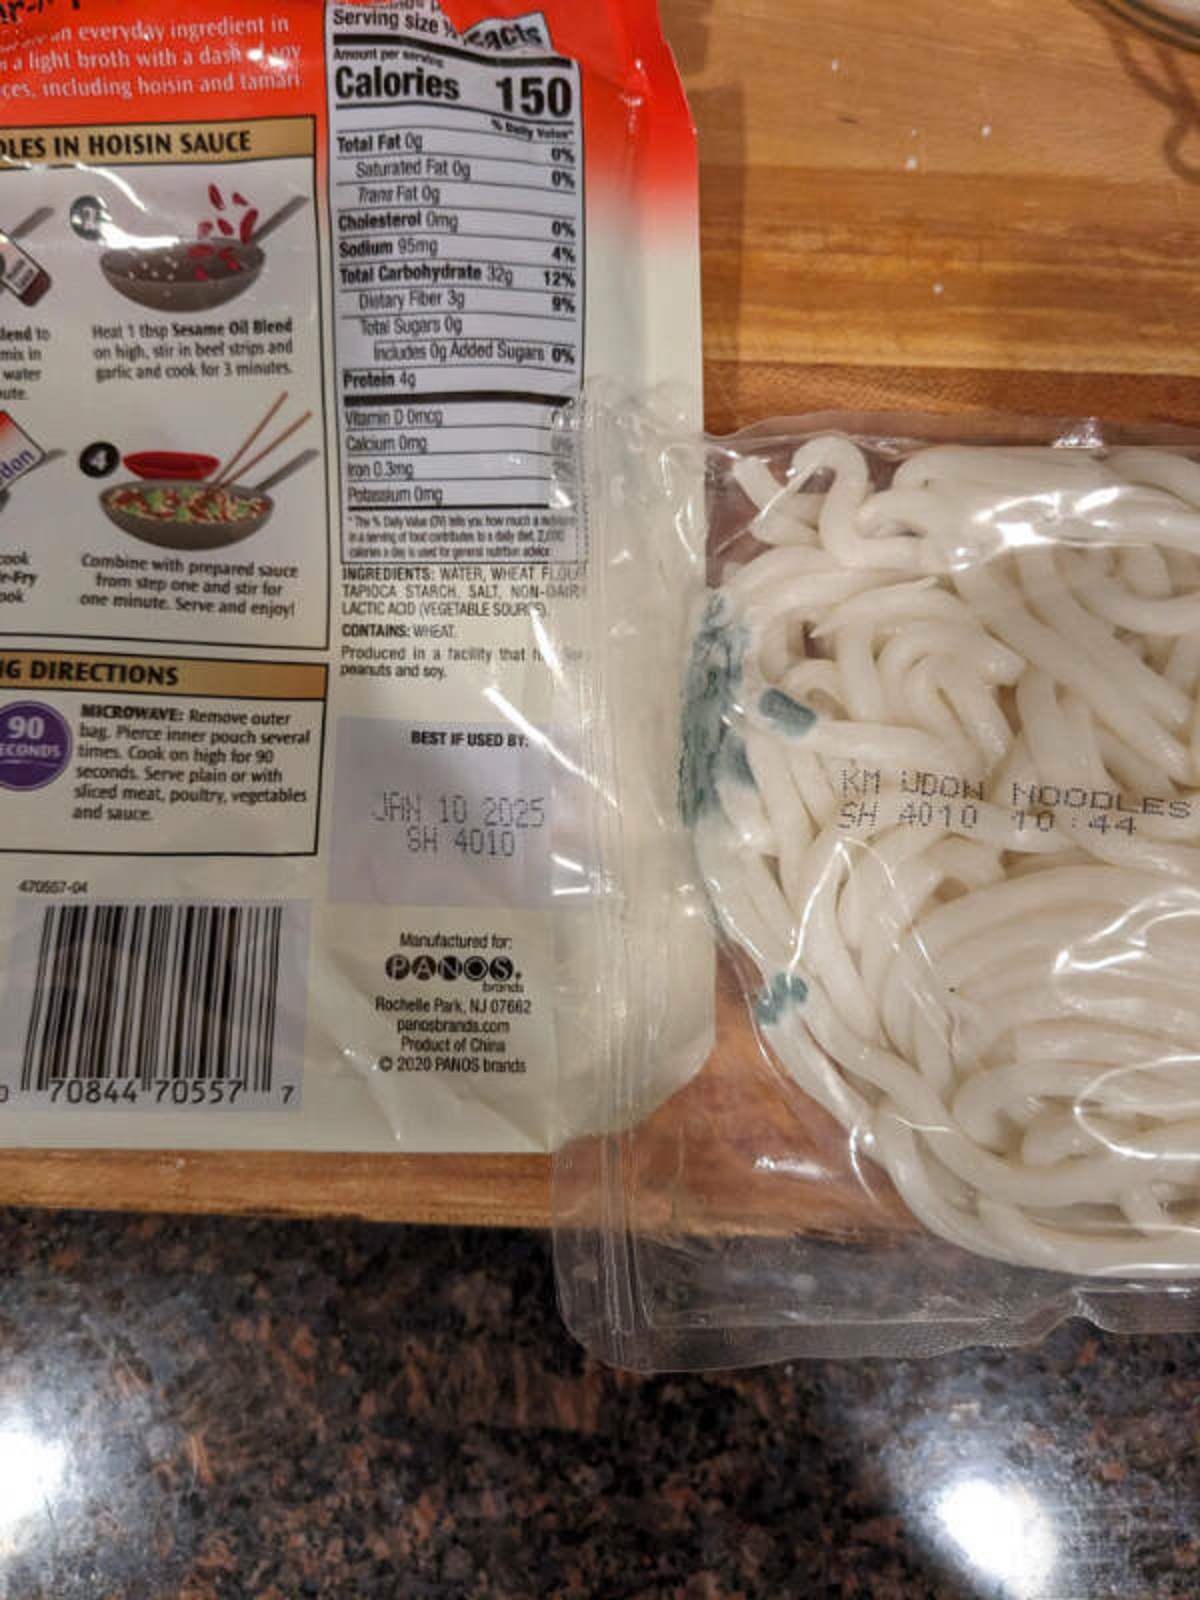 “I just wanted some noodles at the end of a long day”